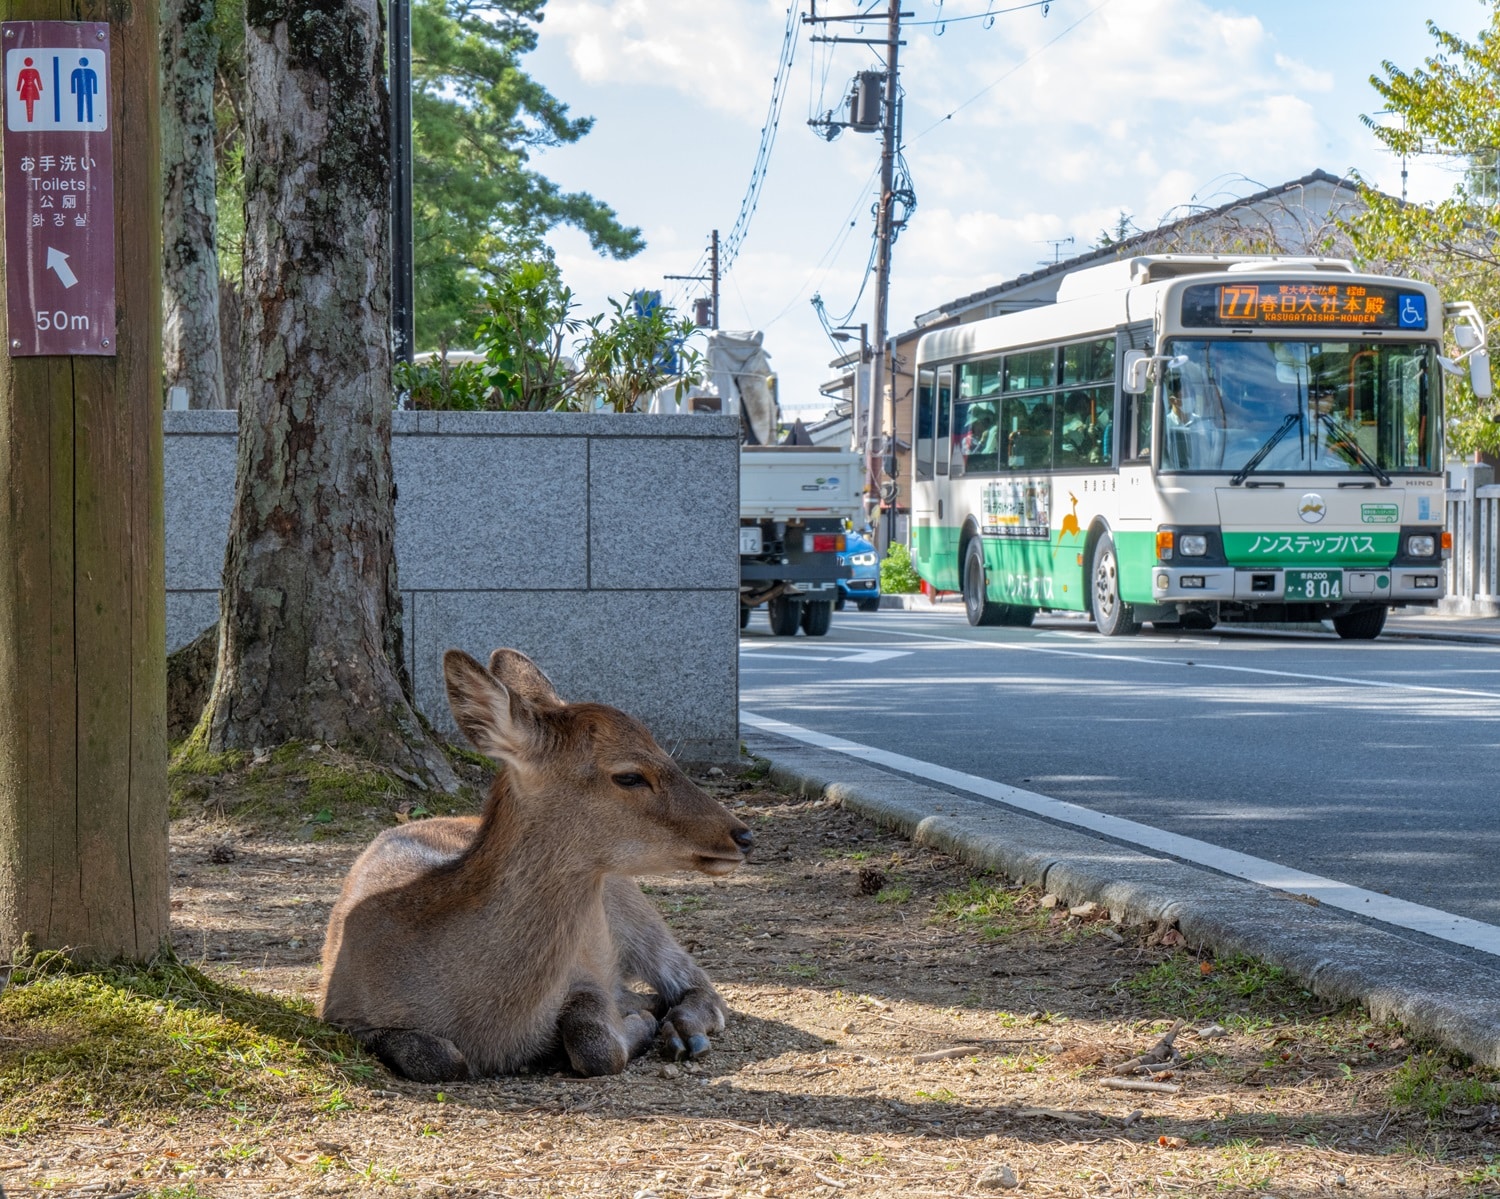 japanese bus with deer in foreground